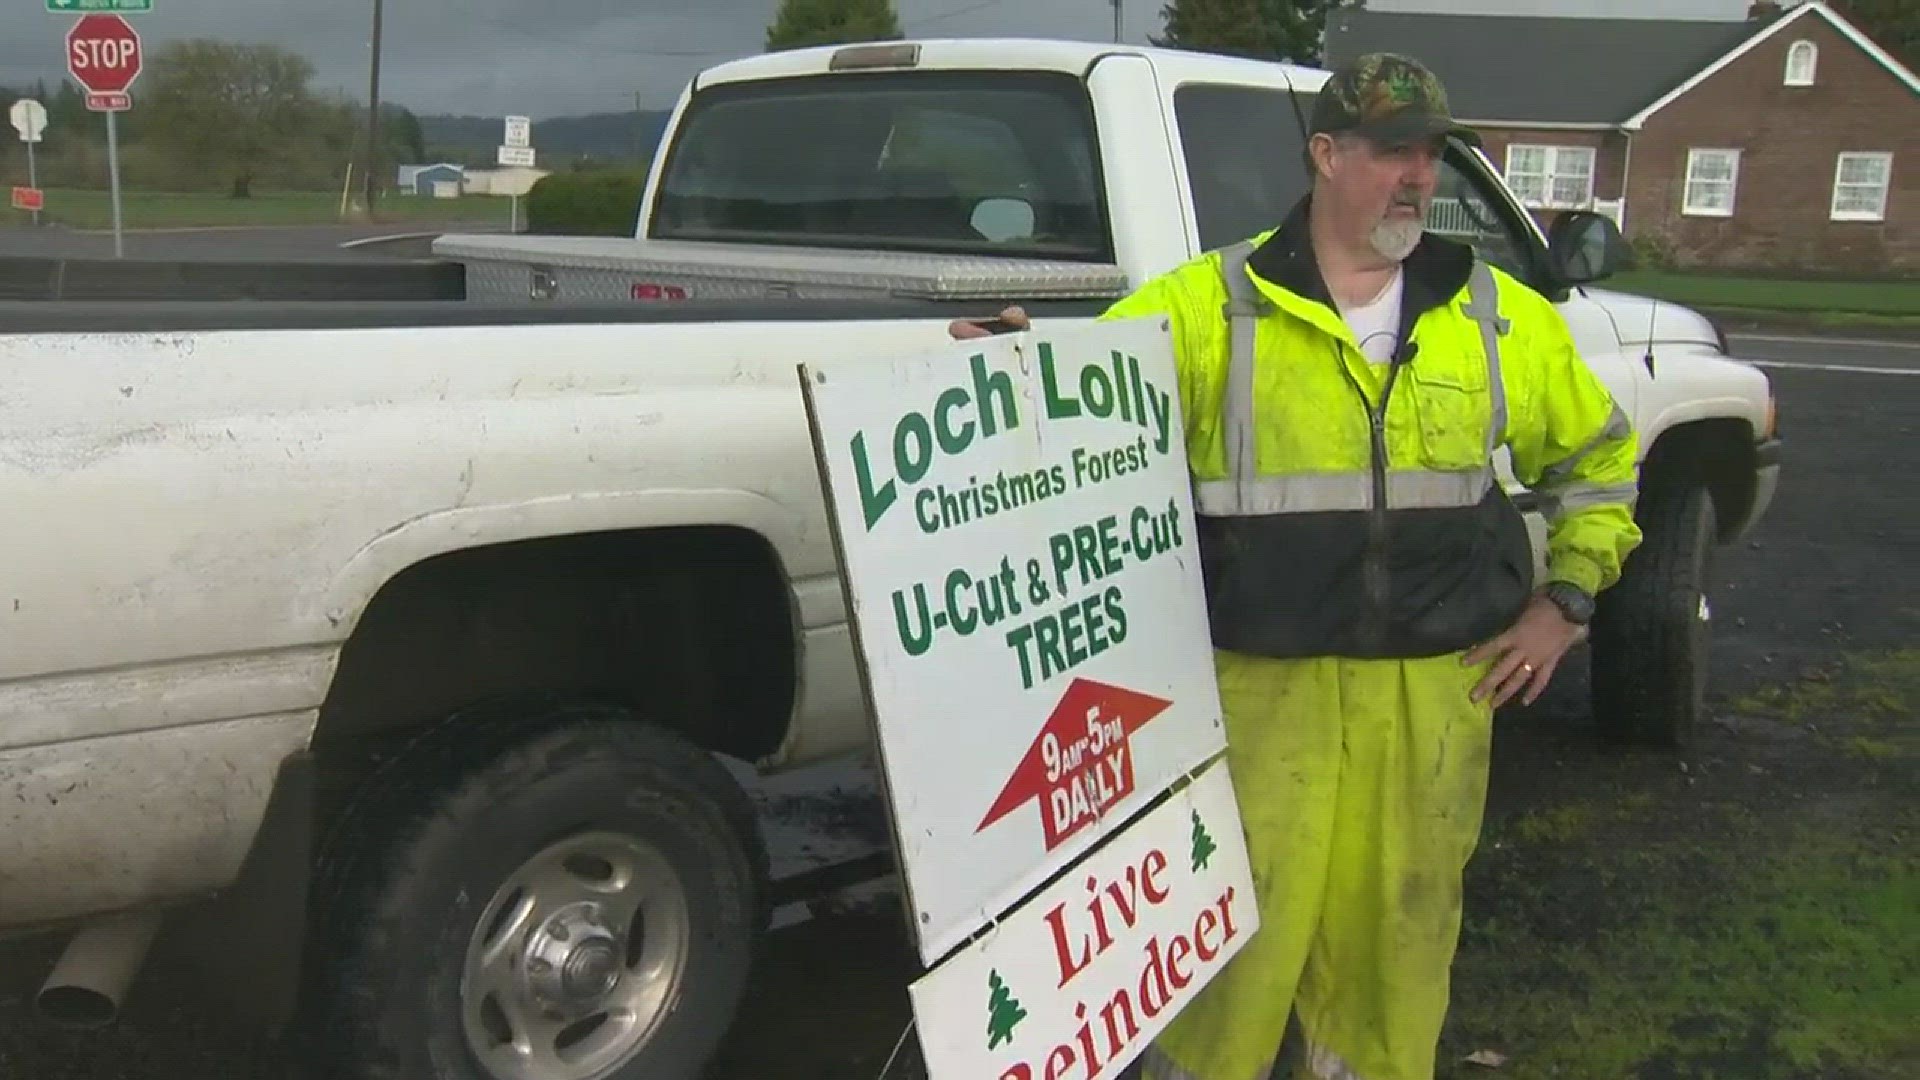 Photojournalist Nick Beber met up with Terry Burns of Loch Lolly Christmas Forest and followed along with their Thanksgiving tradition, putting up signs for their grand opening tomorrow.